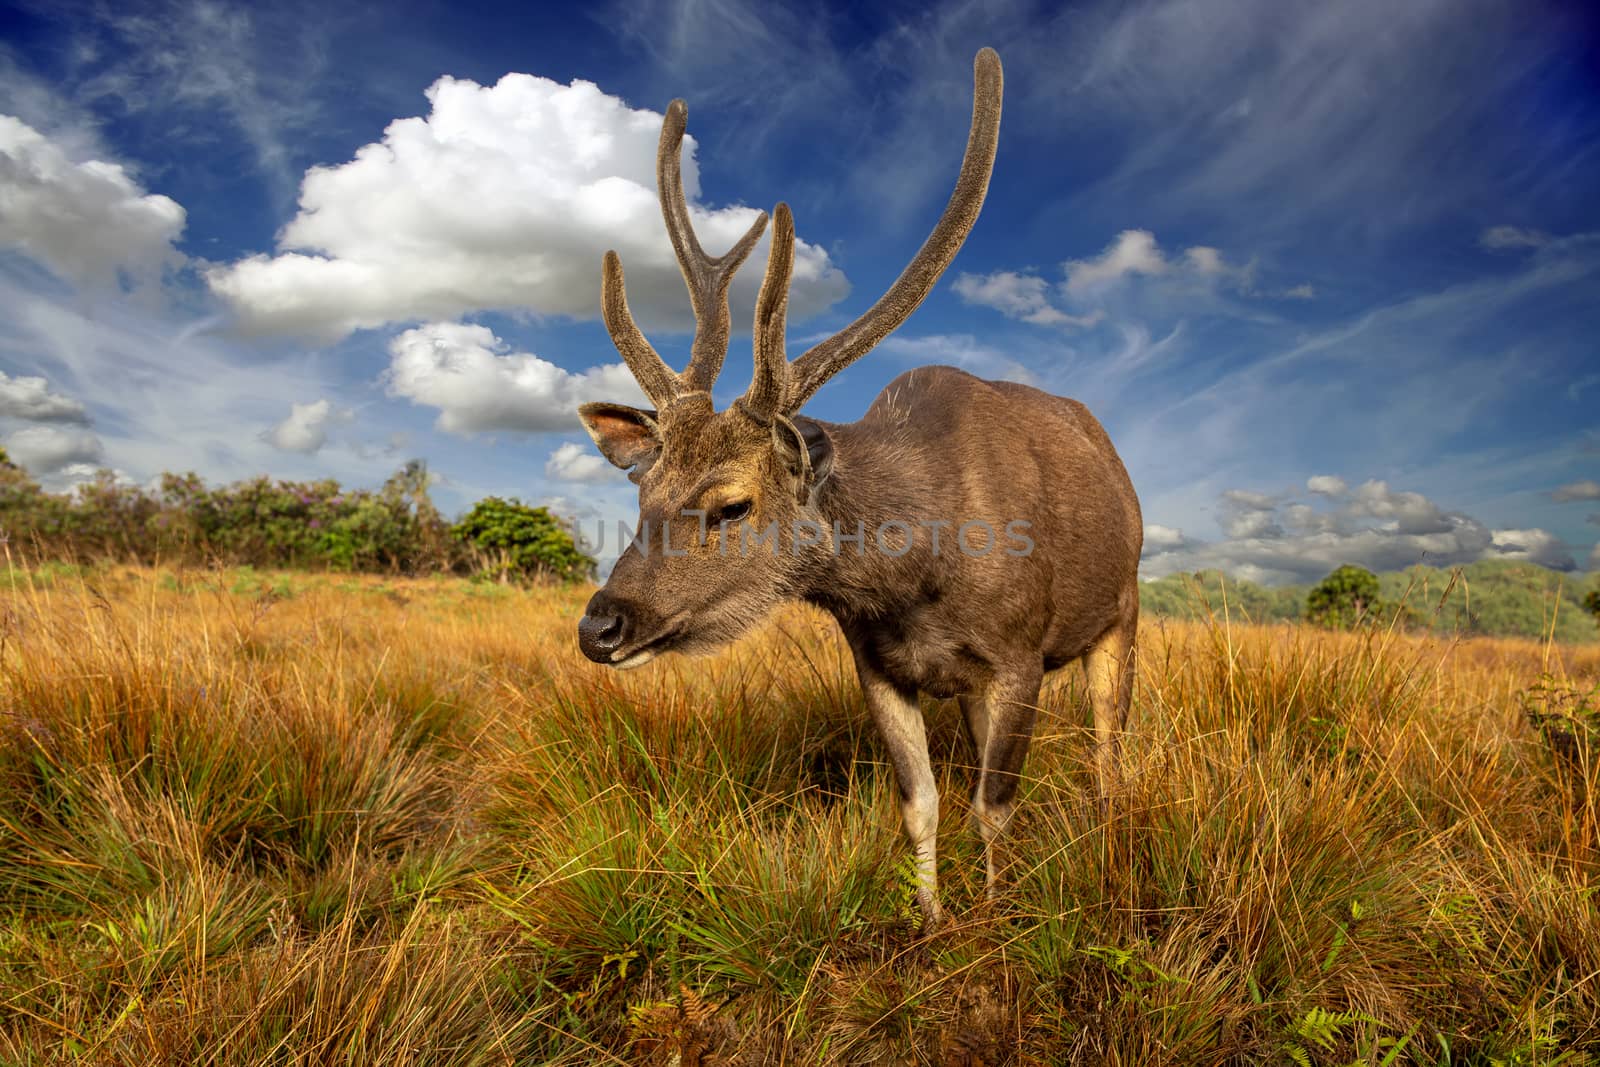 Deer on a background of beautiful sky and clouds. In the background is a forest and a tree. A sambar deer in the forests of Horton Plains National Park. Close-up of a deer muzzle with shaggy horns.